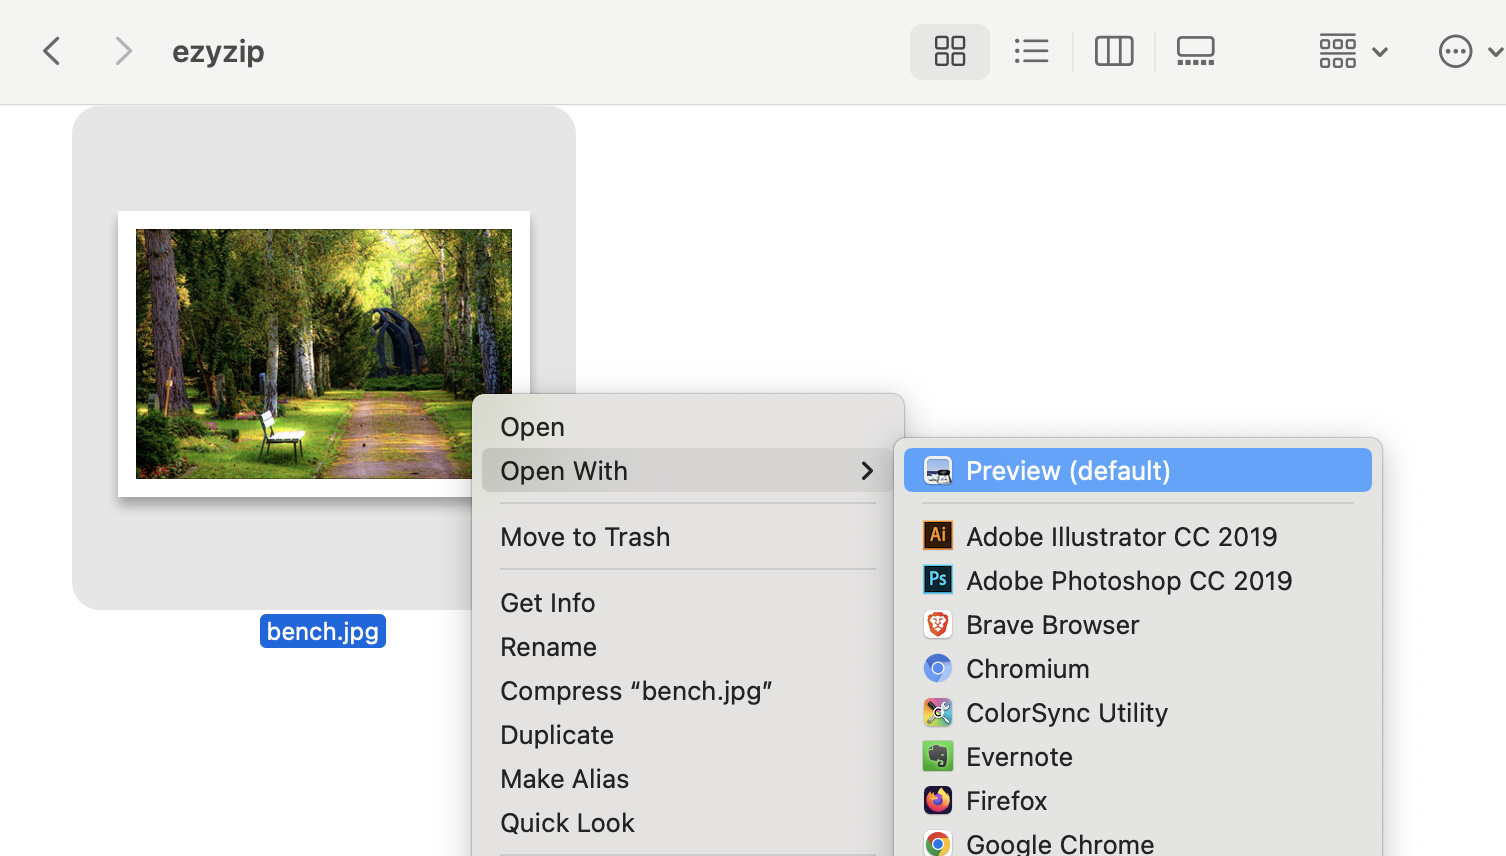 How To Resize Images on Mac with Preview: Step 1